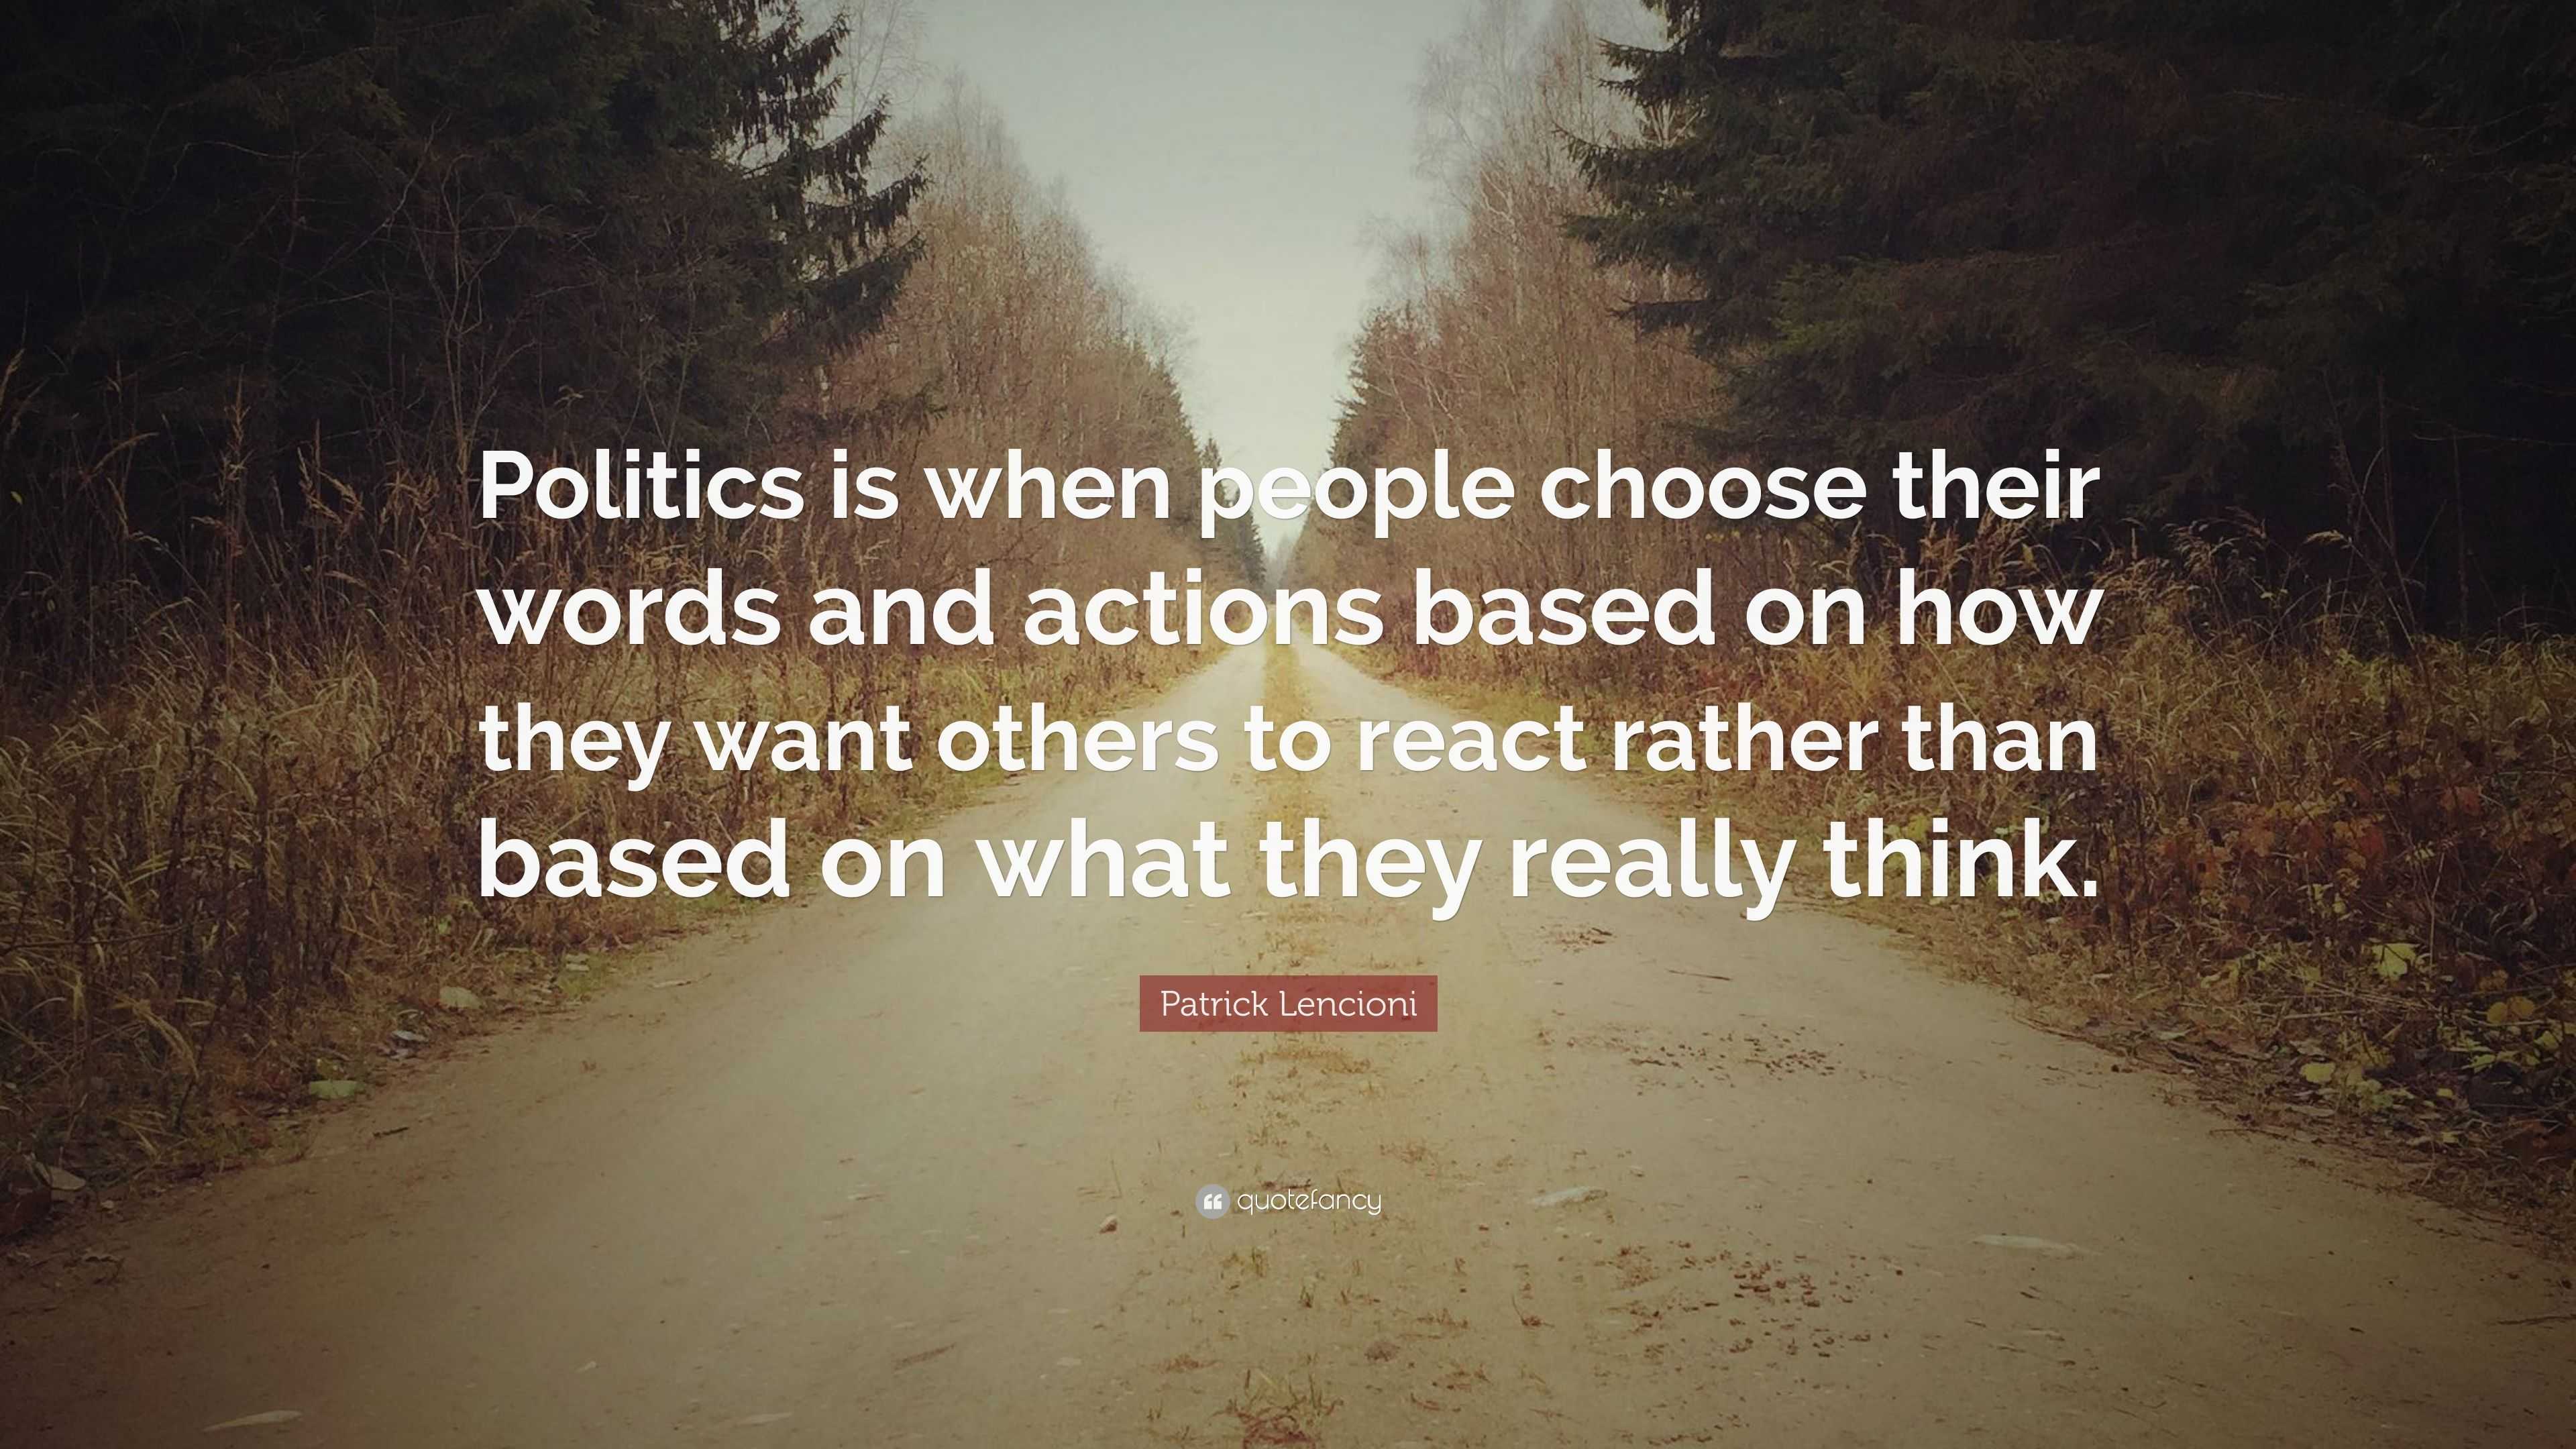 Patrick Lencioni Quote: “Politics is when people choose their words and ...